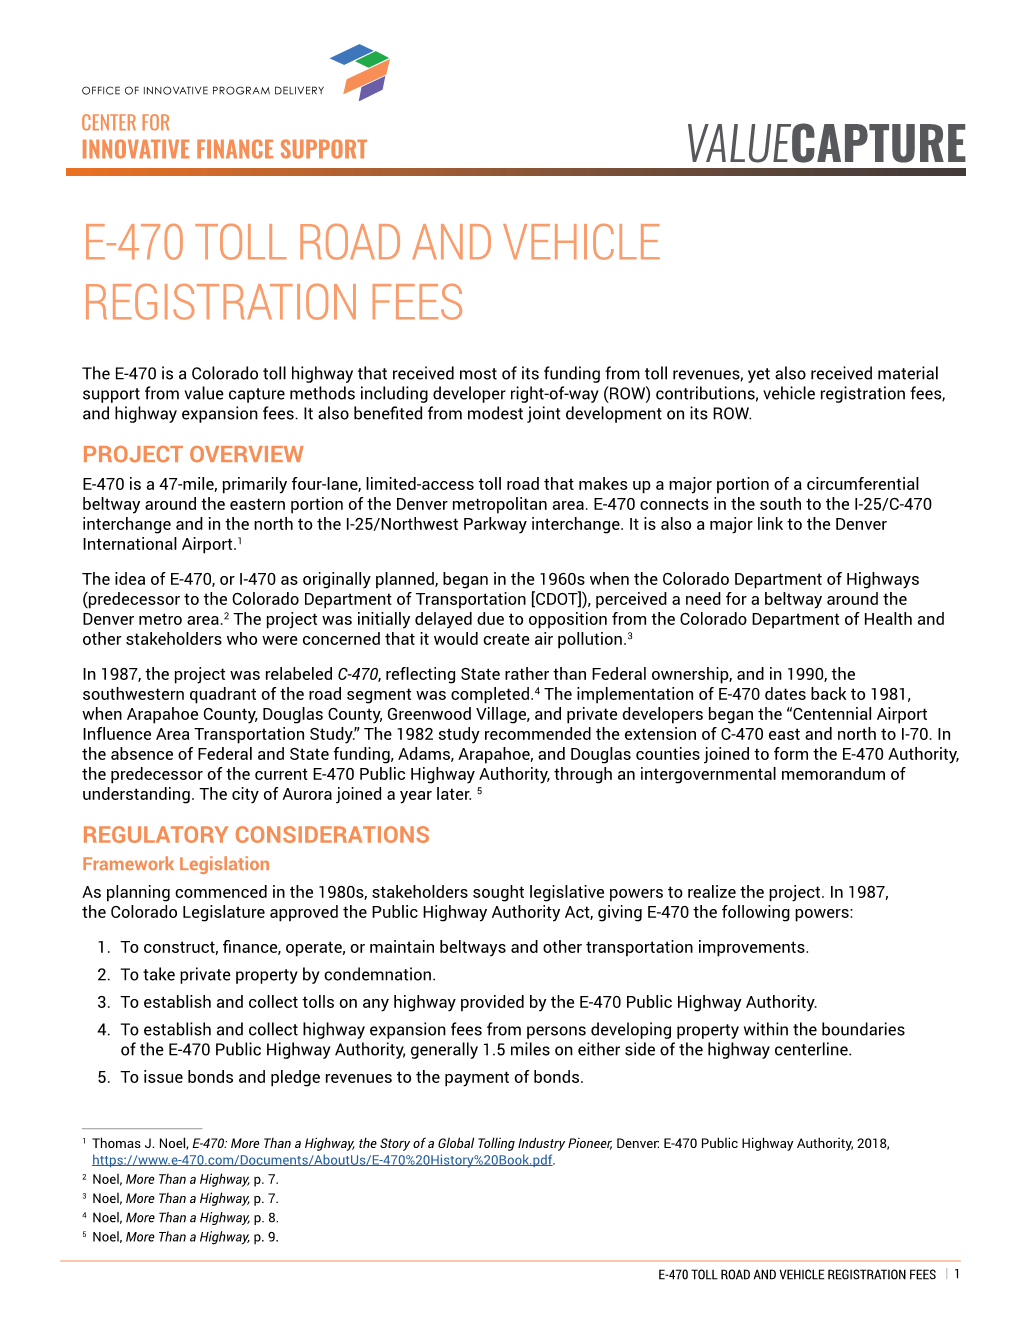 E-470 Toll Road and Vehicle Registration Fees